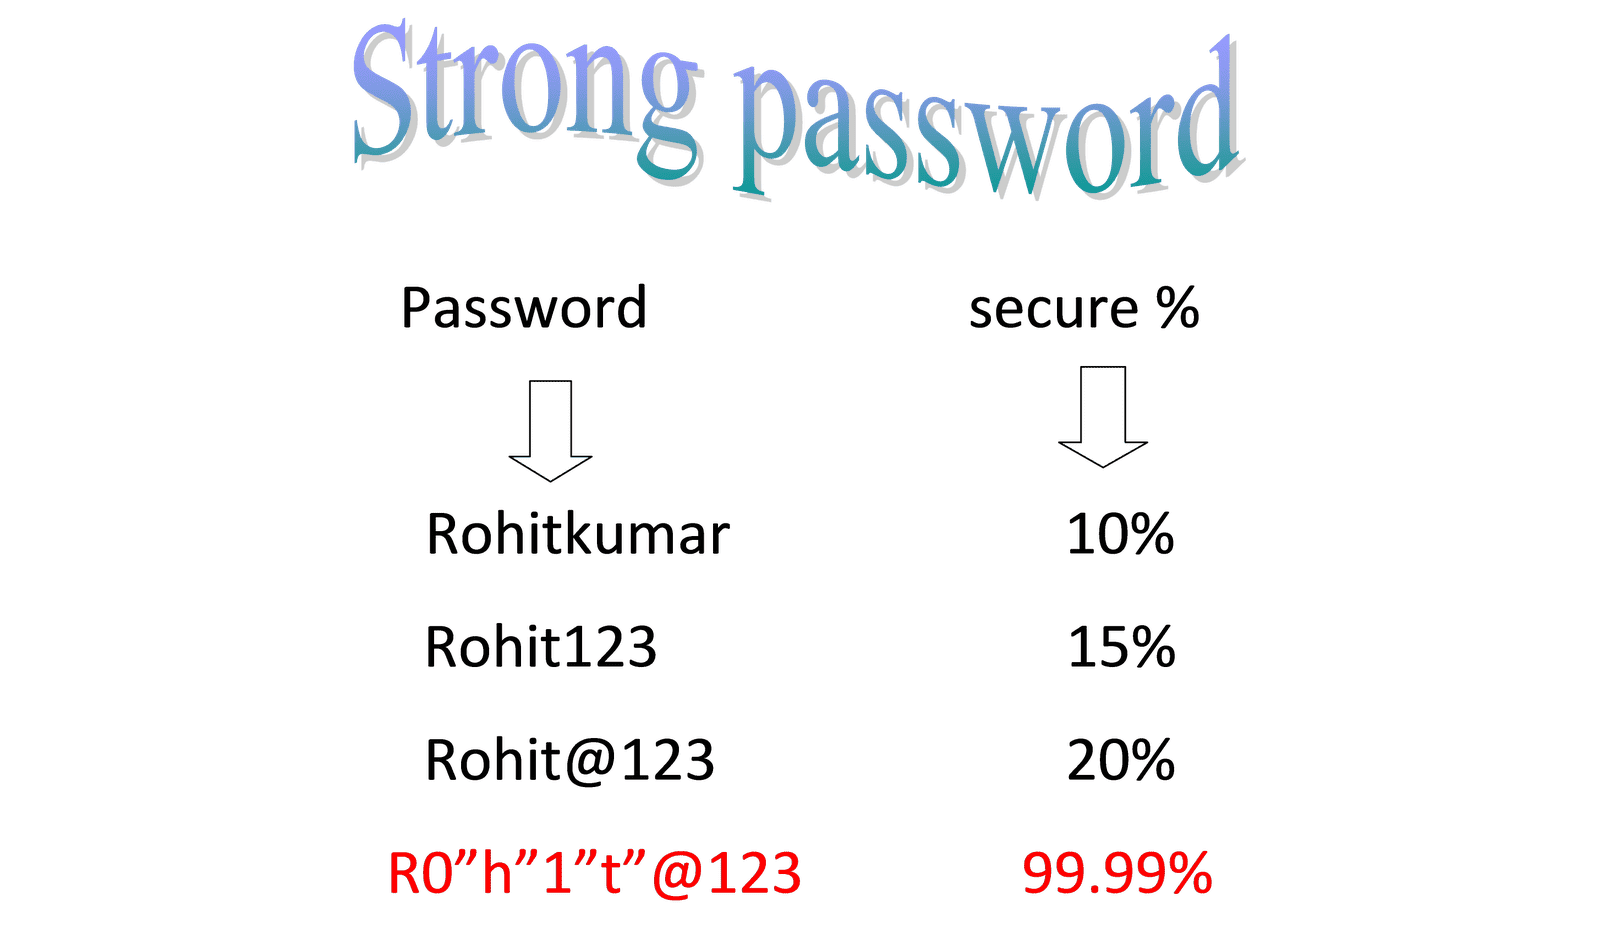 one password sign in